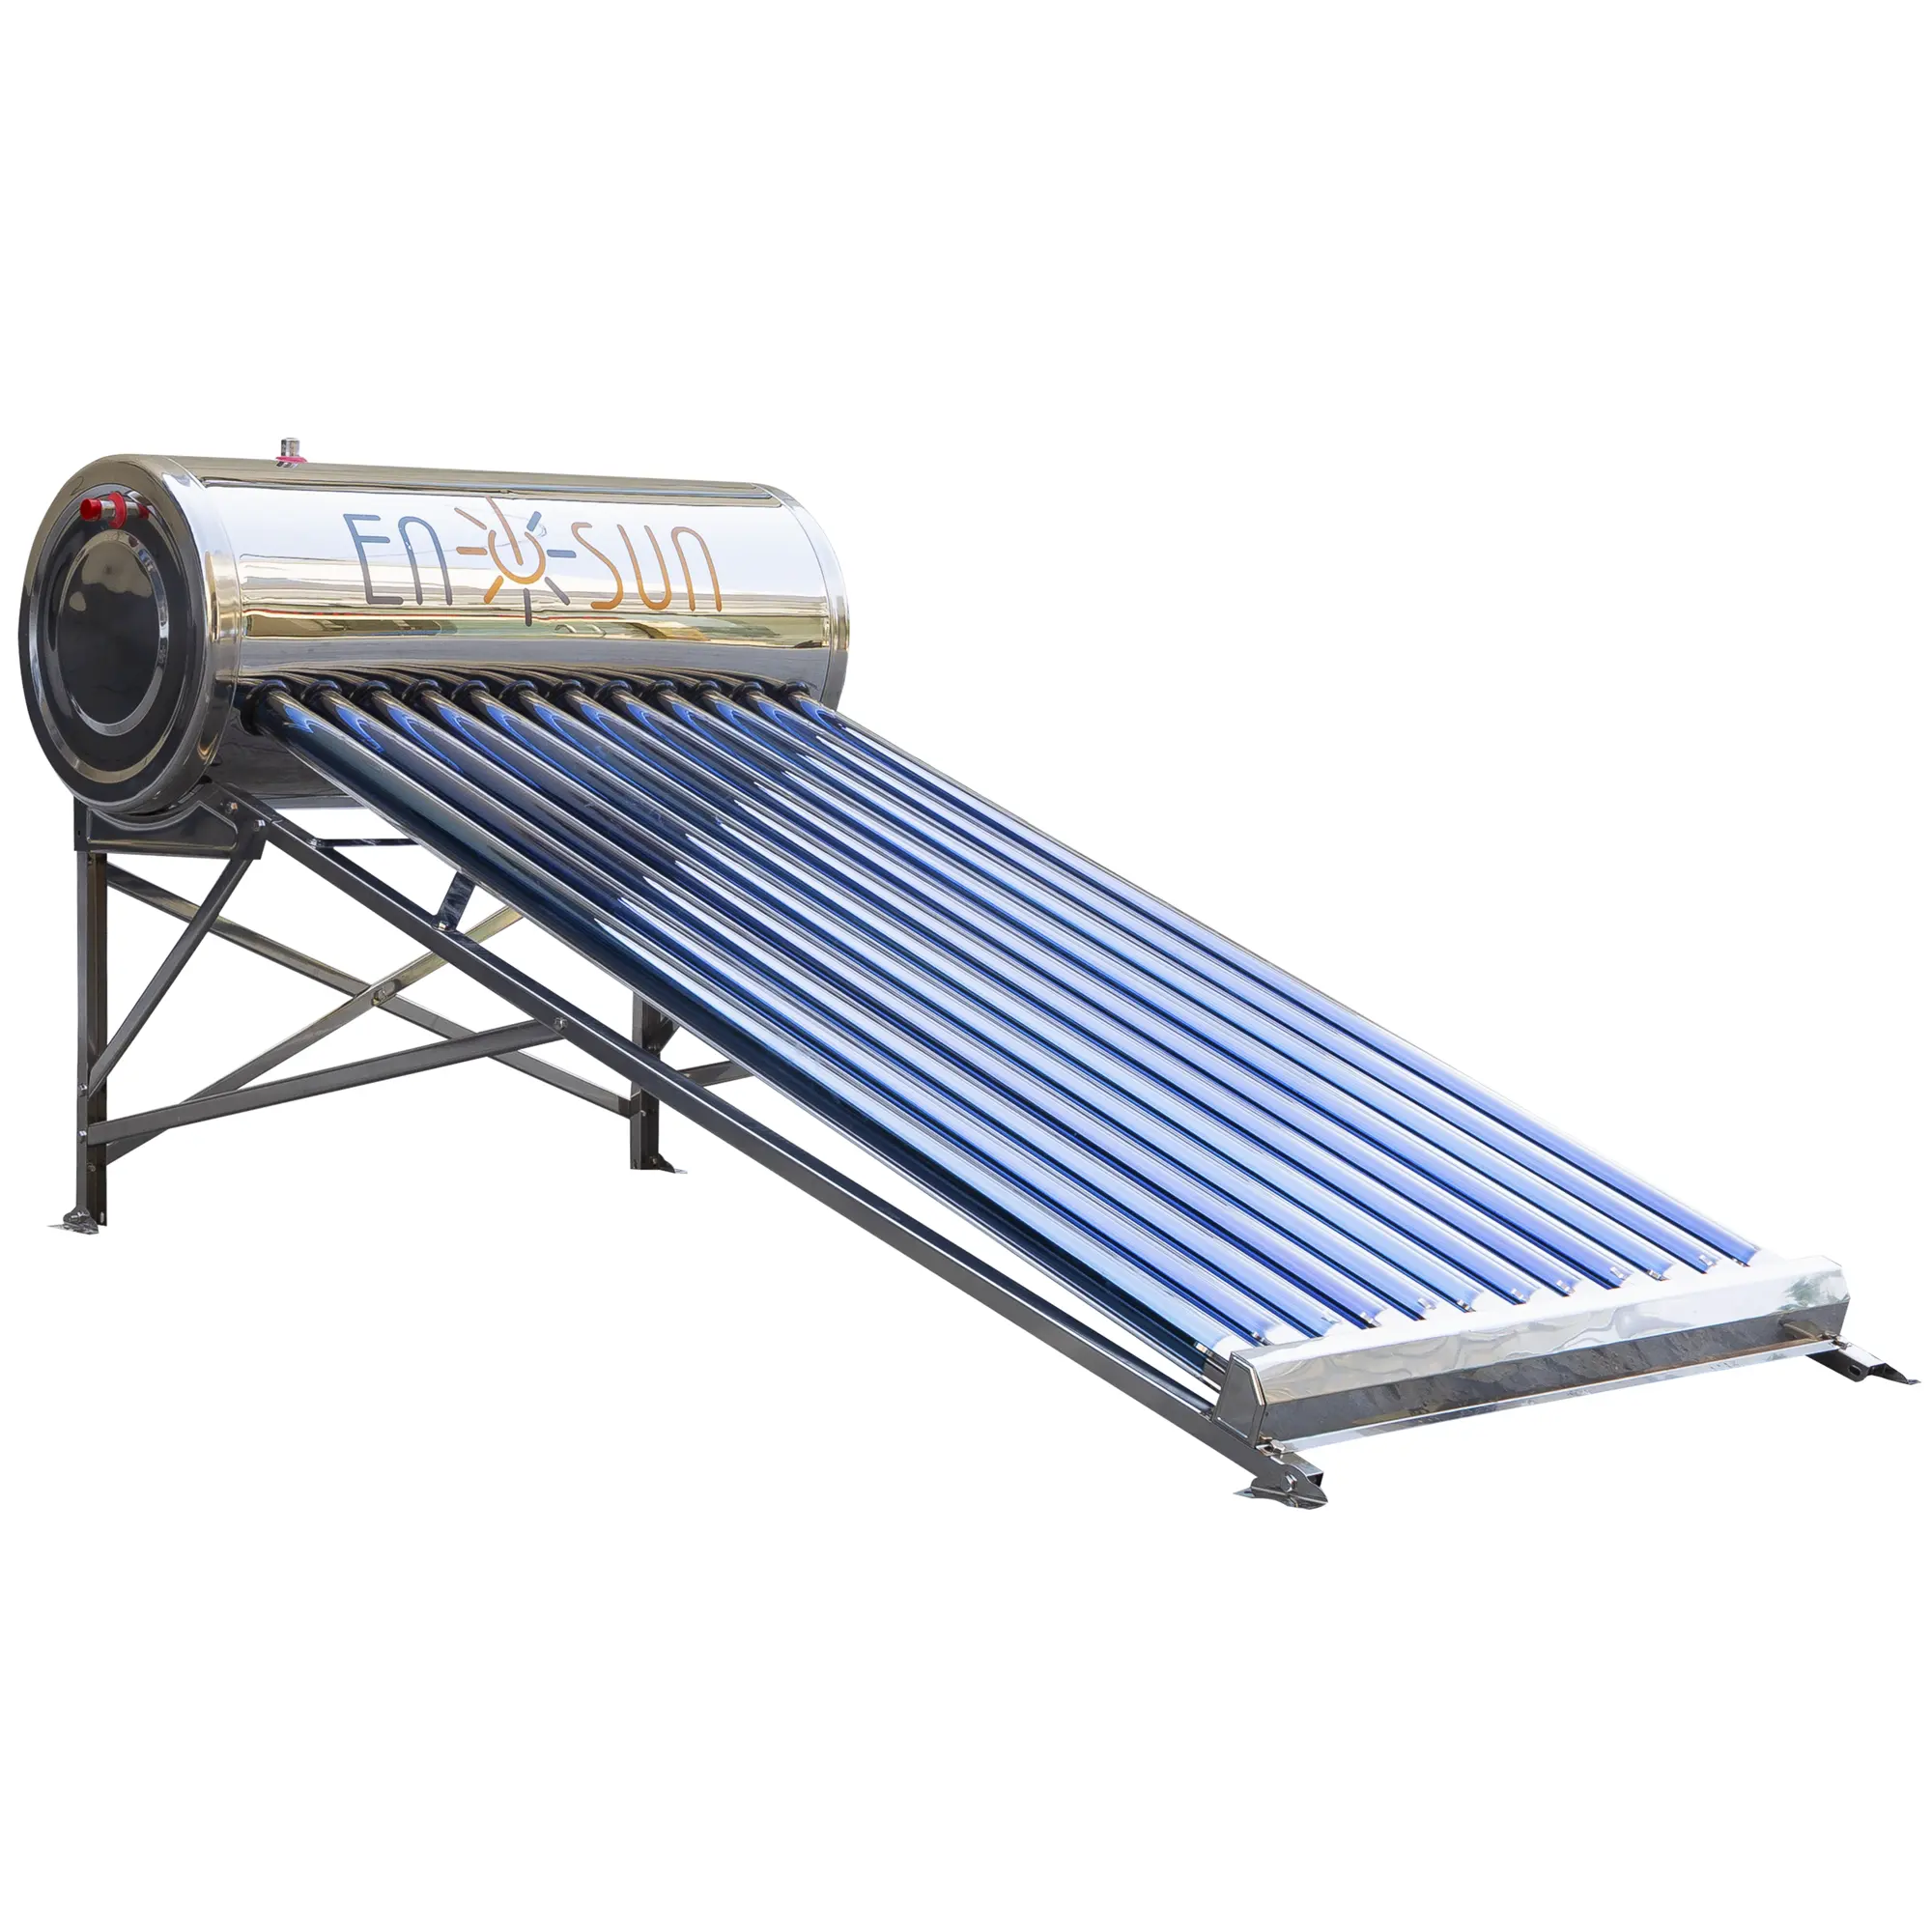 12 Tubes Non-pressure solar water heater with all stainless steel for mexico